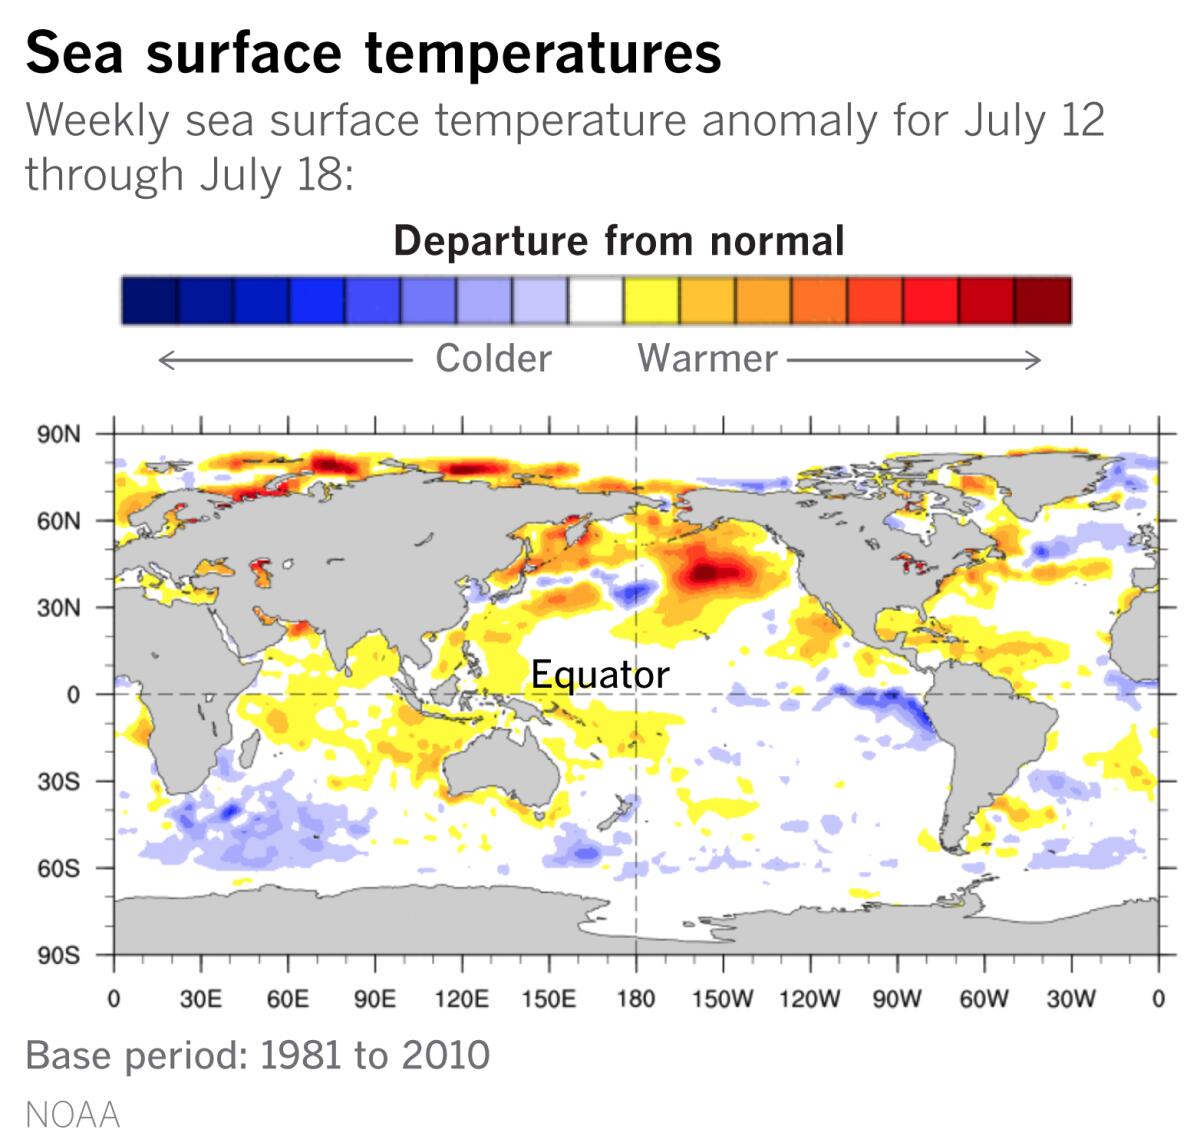 Cooler-than-average sea surface temperatures have been detected in the equatorial Pacific off South America.